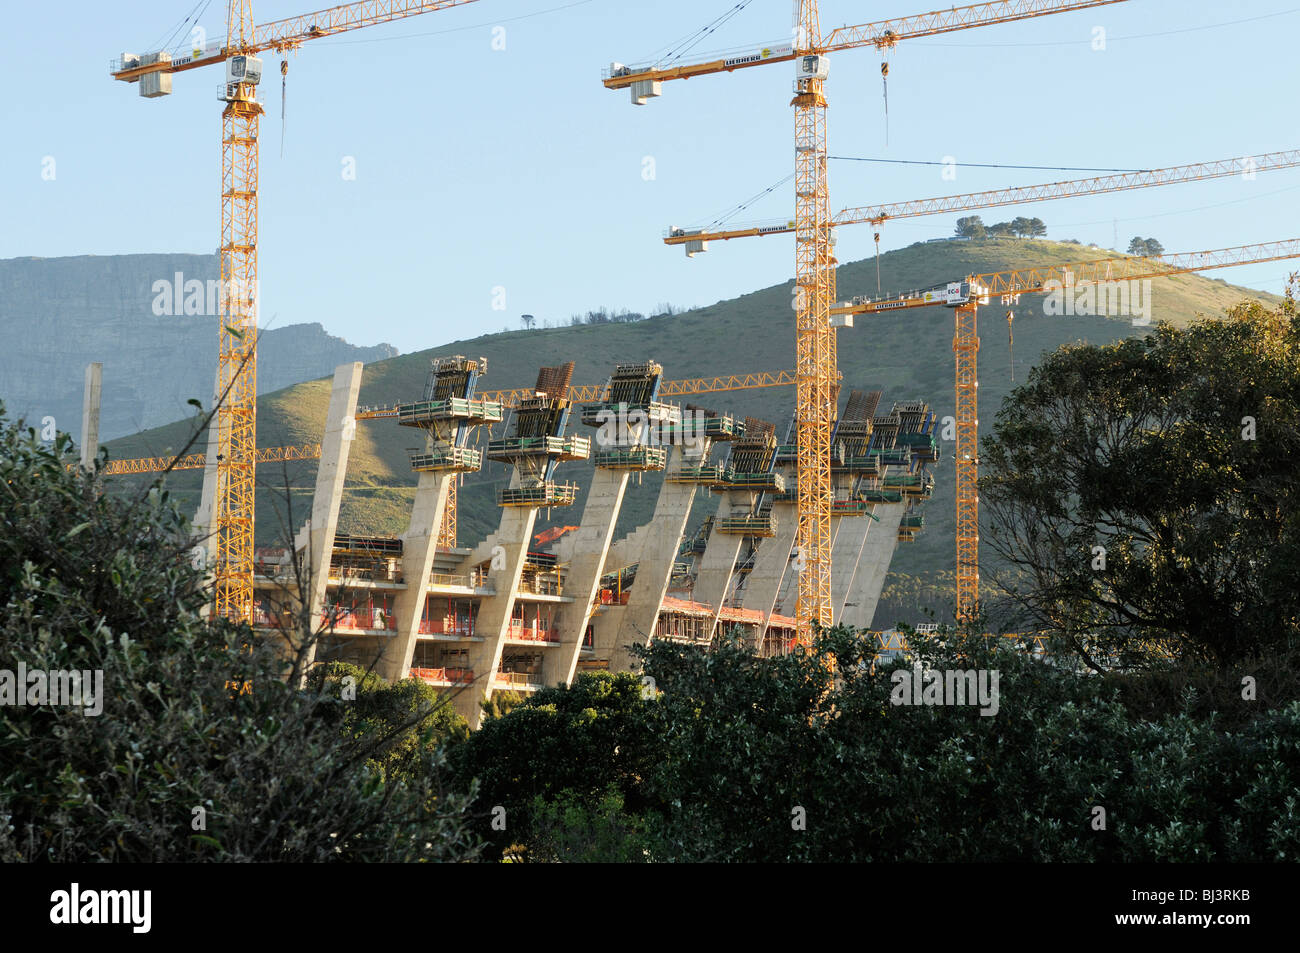 Cape Town Stadium construction site, Green Point Stadium, Signal Hill, Cape Town, South Africa, Africa Stock Photo